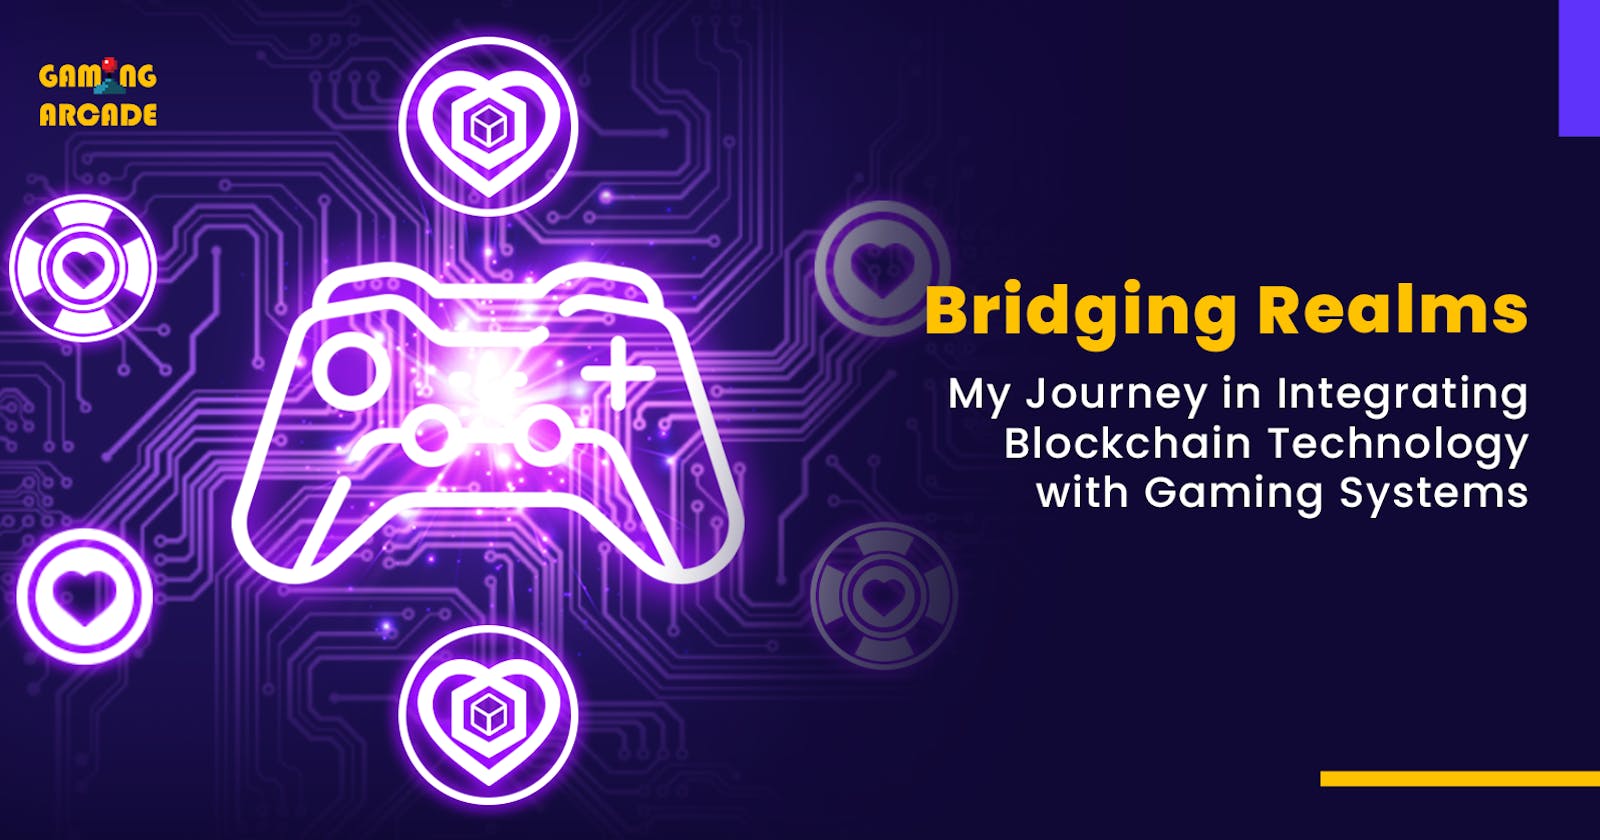 A Journey in Integrating Blockchain Technology with Gaming Systems